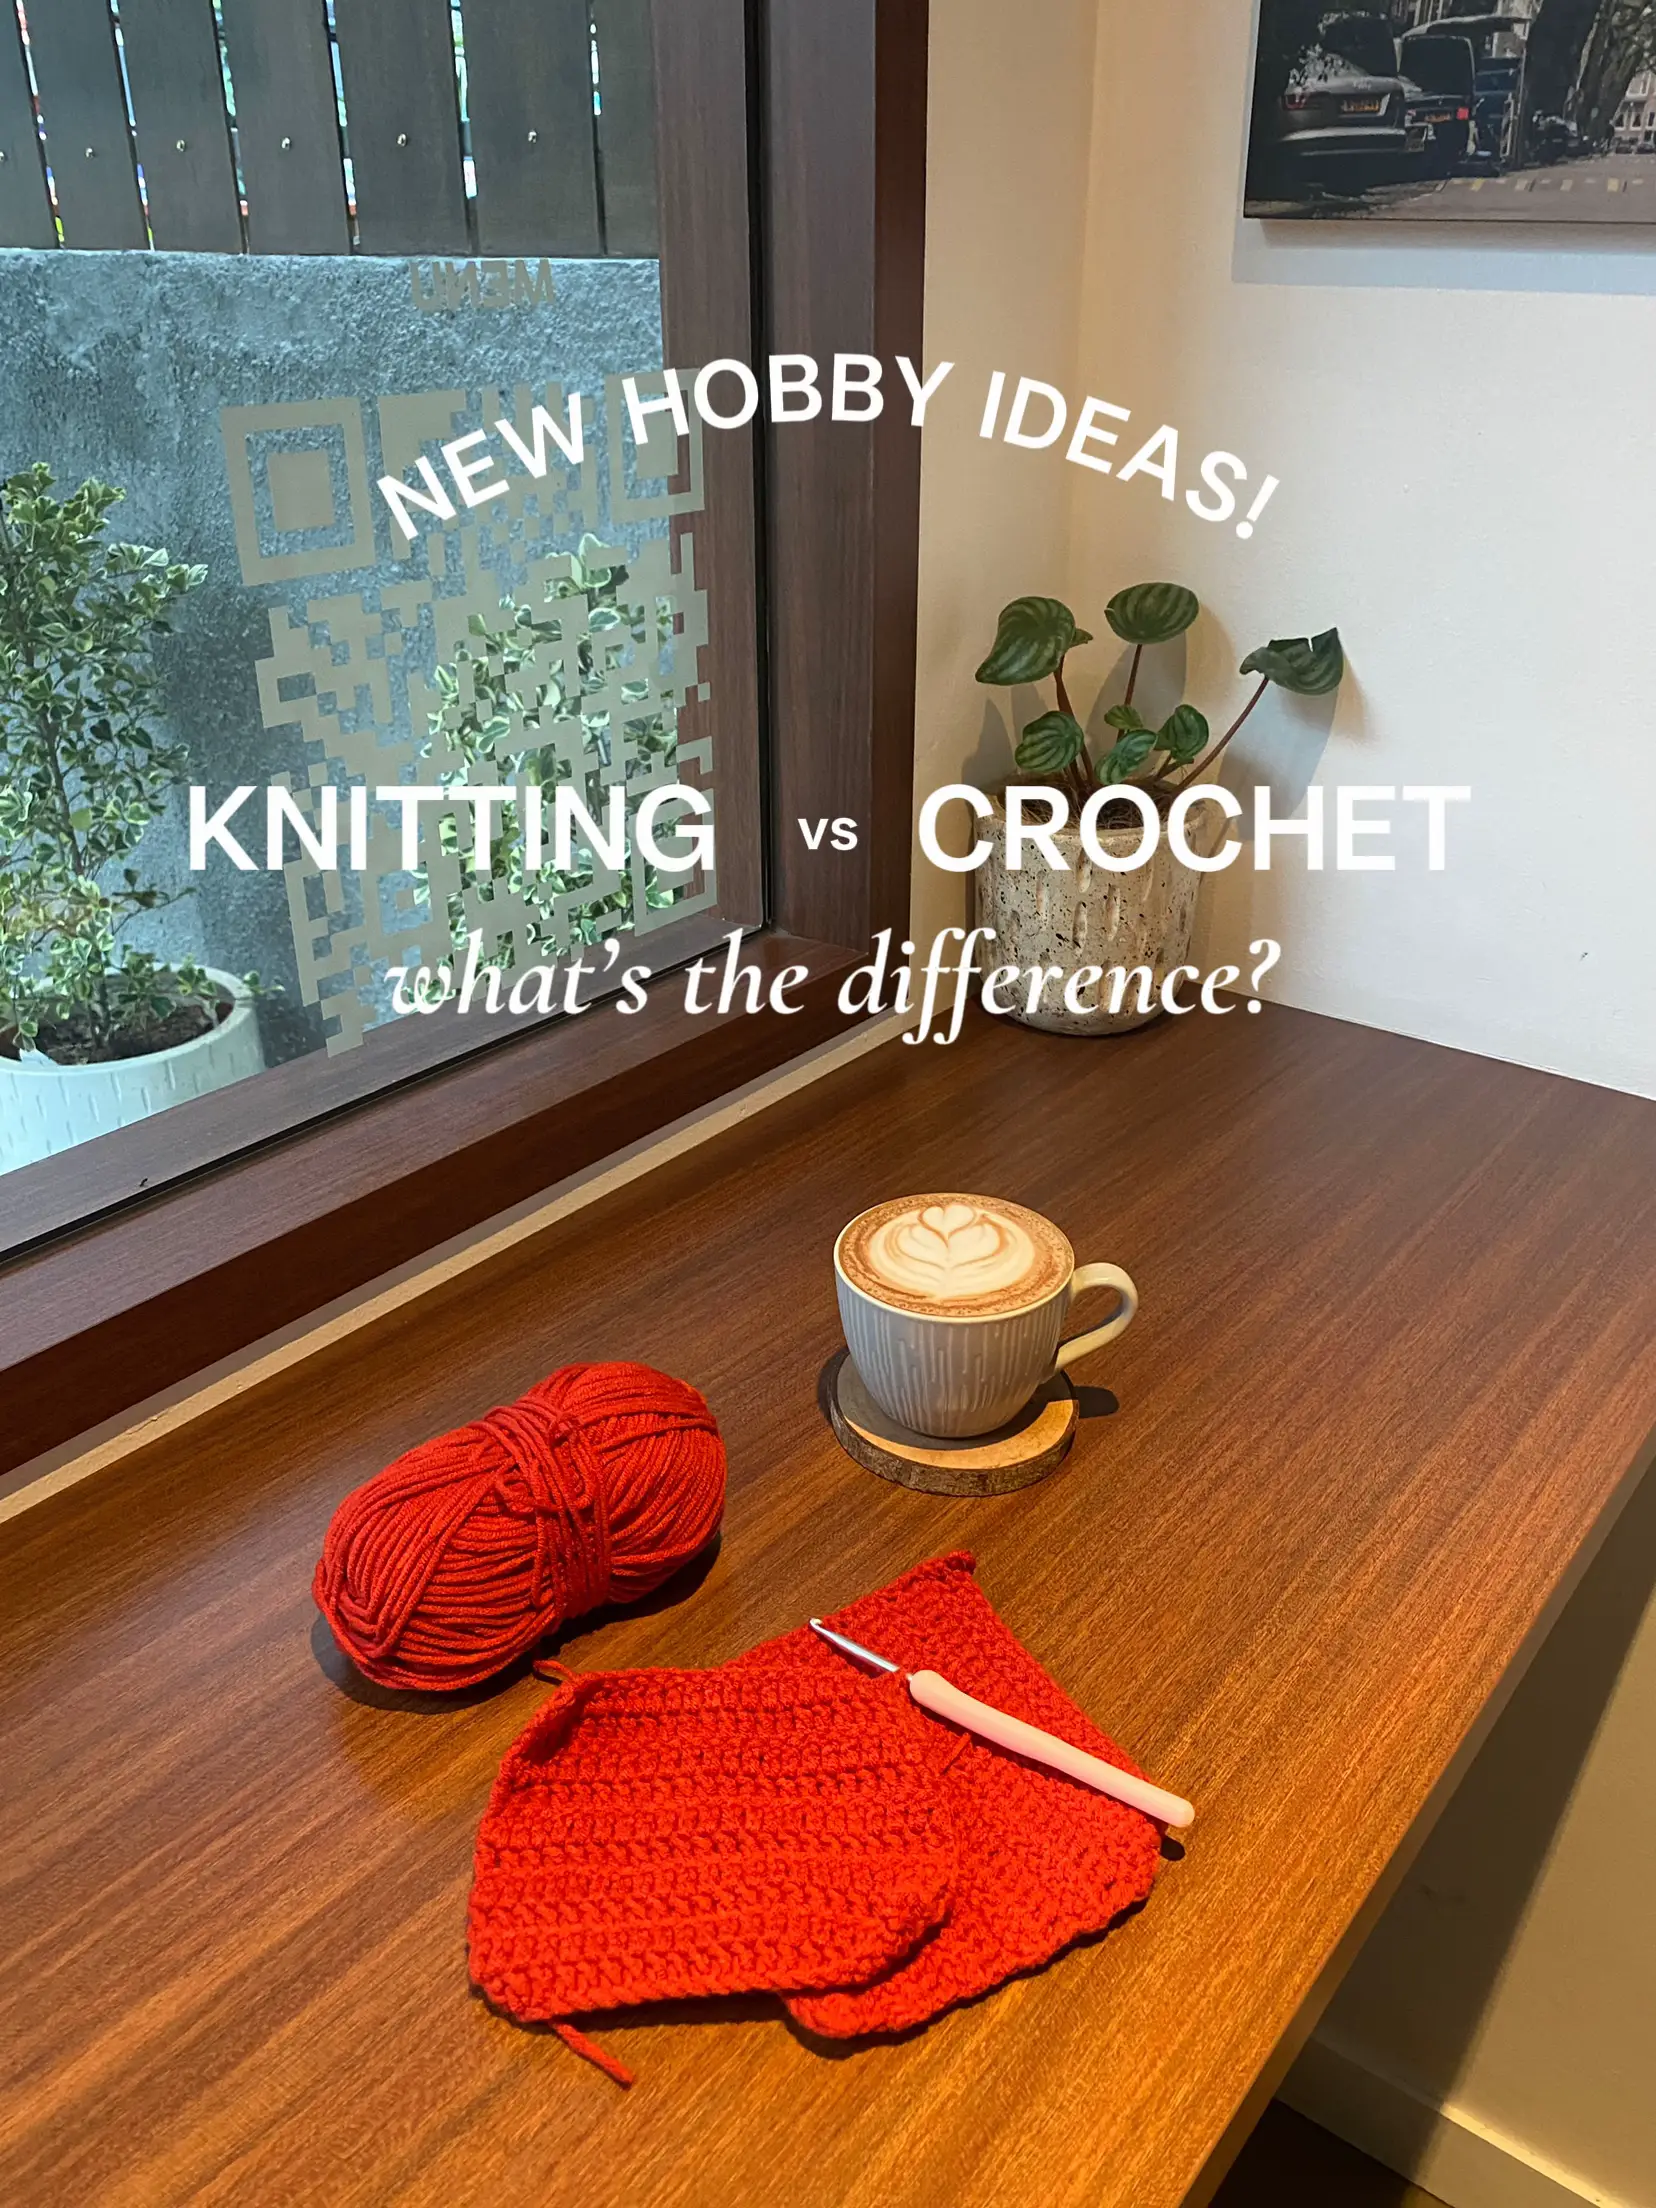 Knitting vs. Crochet - What's the difference?